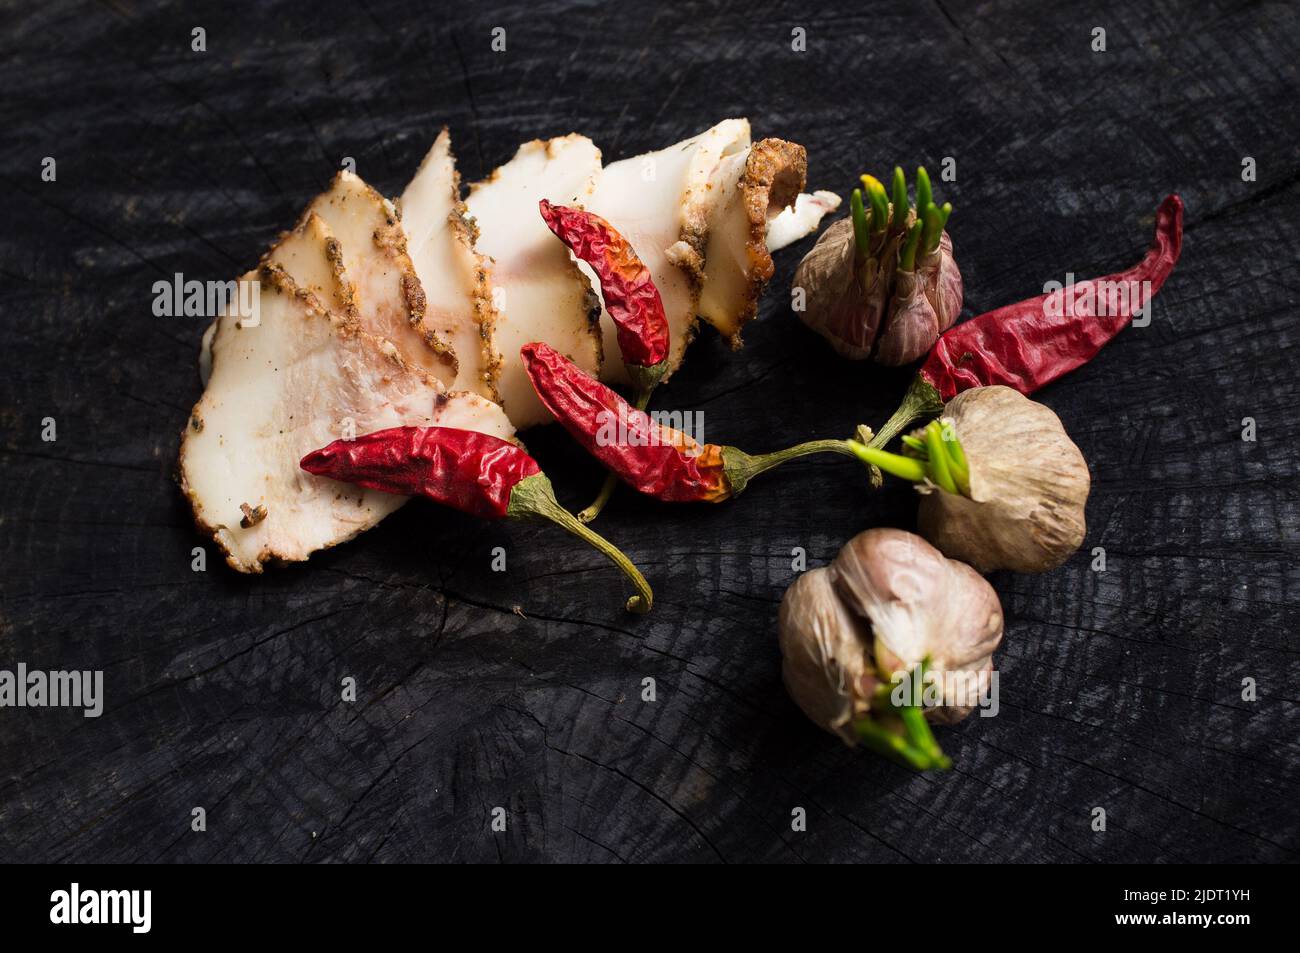 Salo with spices,garlic and red pepper Stock Photo